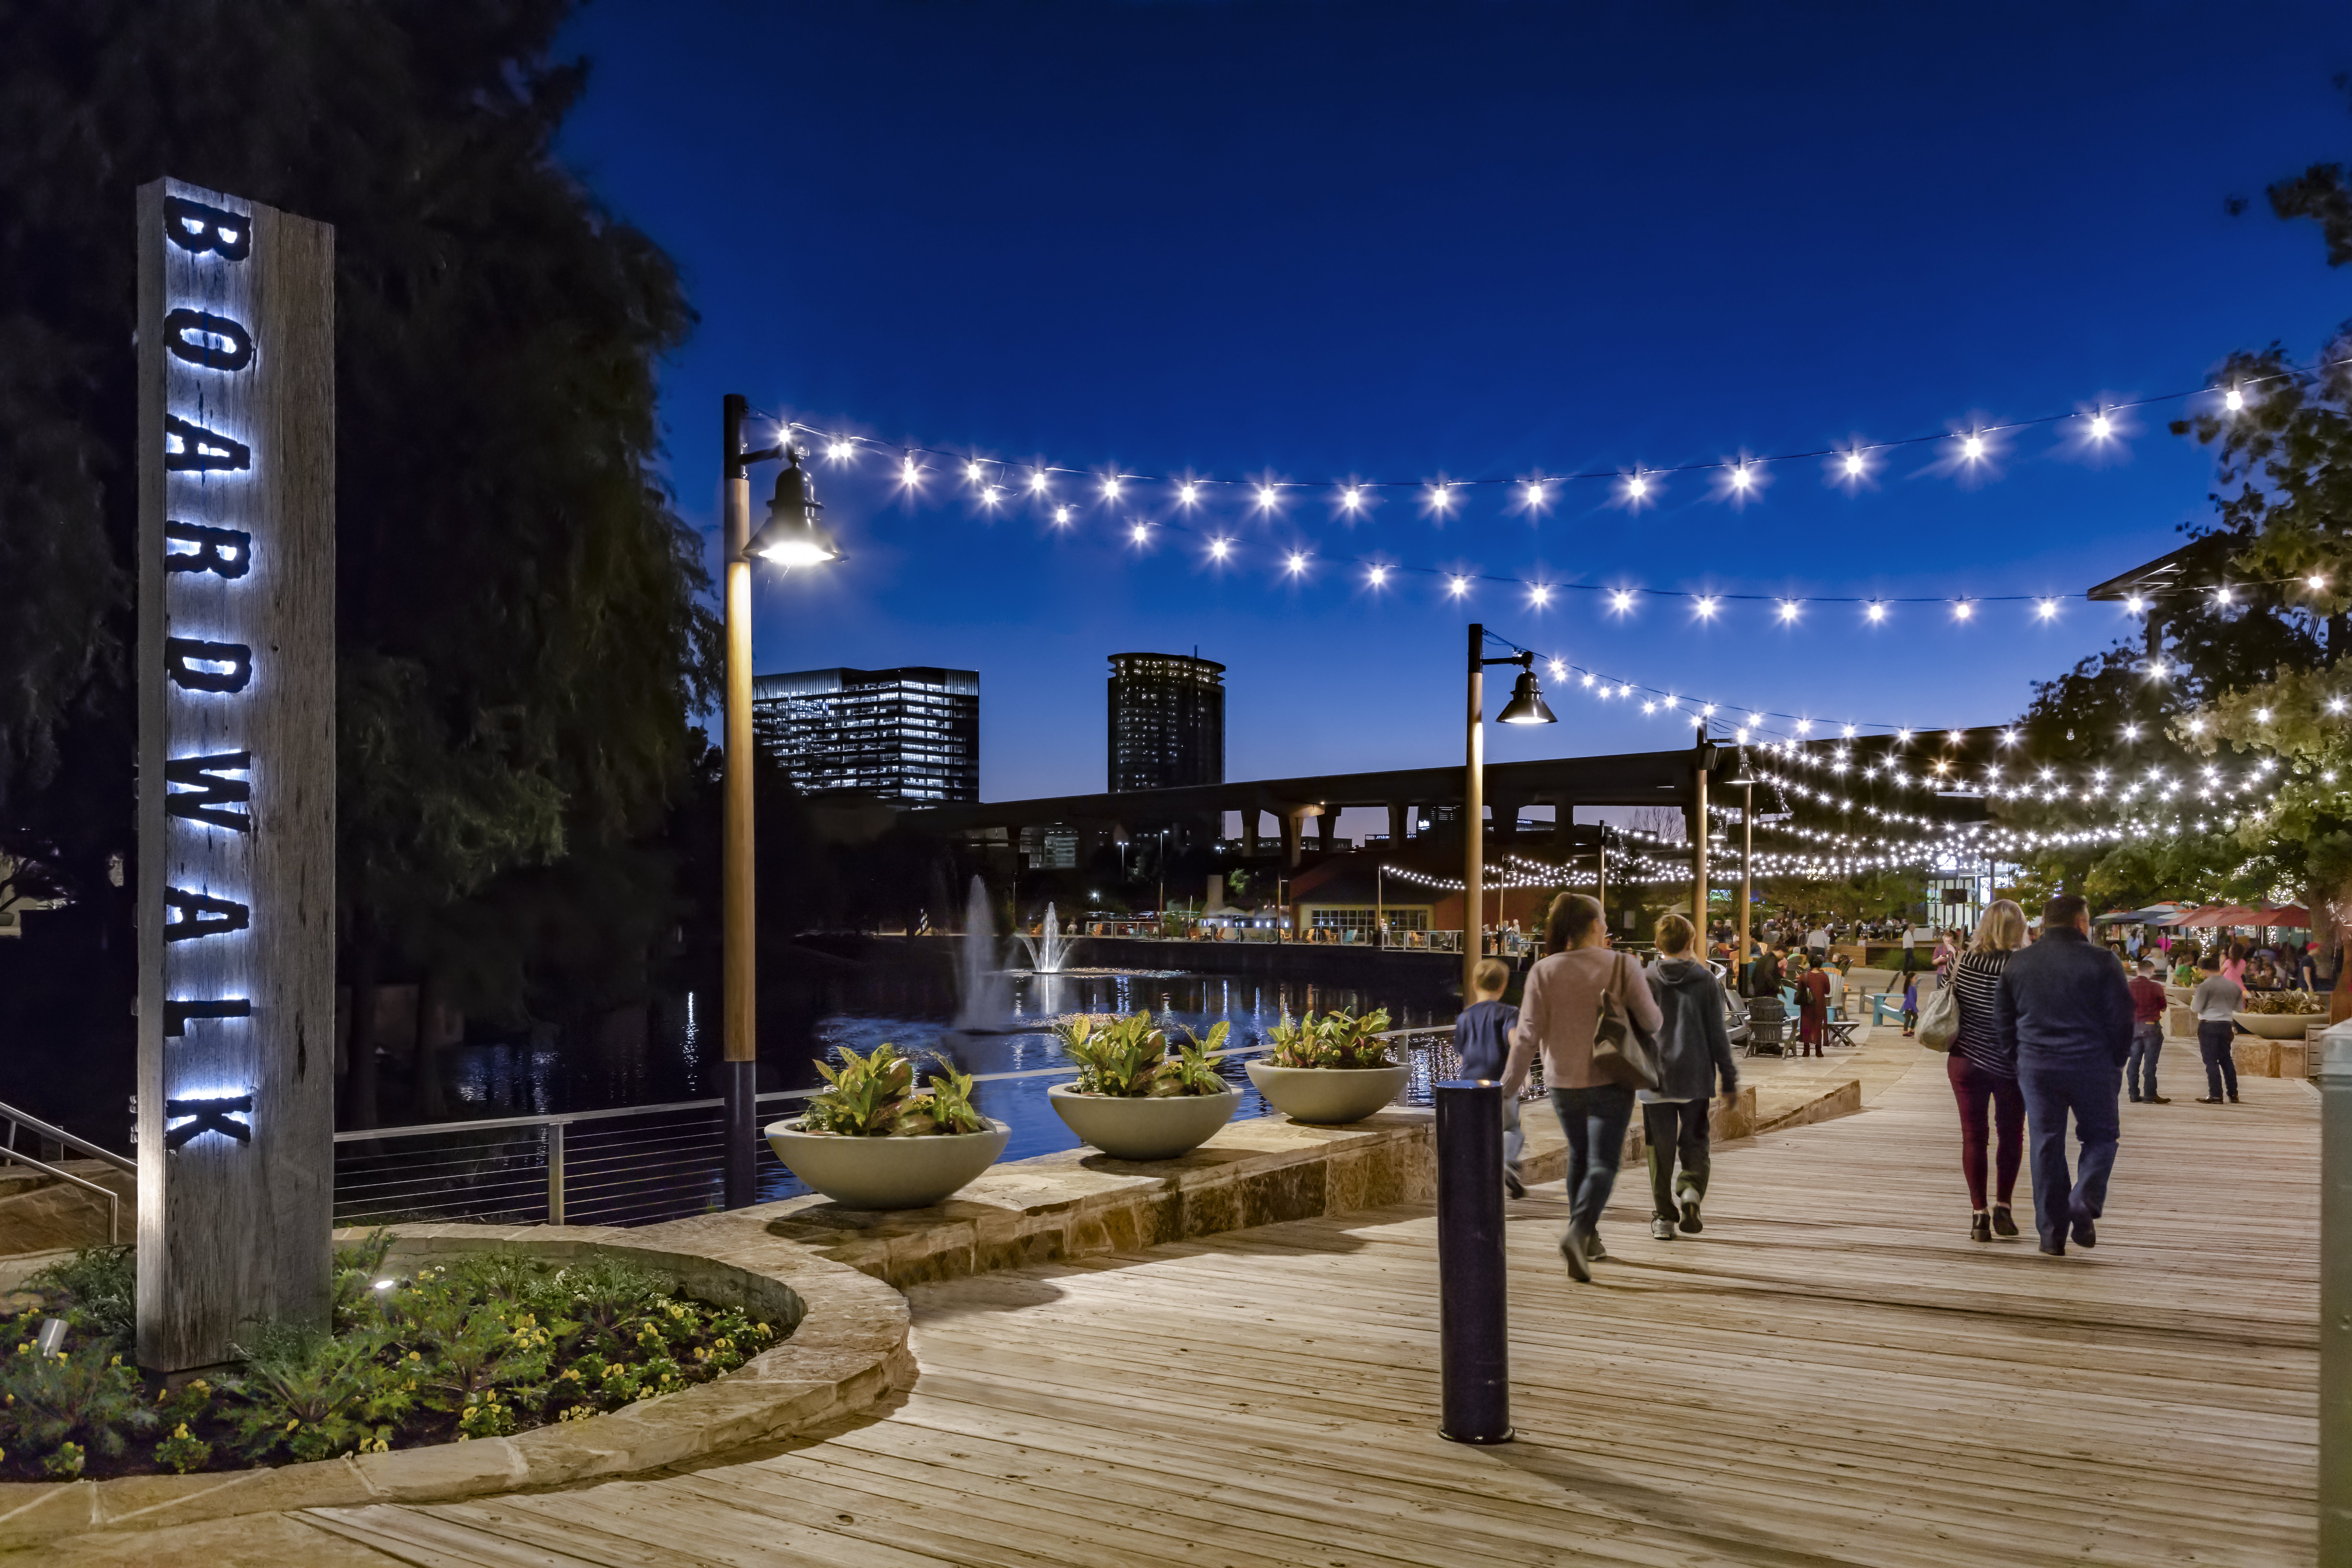 20 Top Things to Do in Plano - The Boardwalk at night